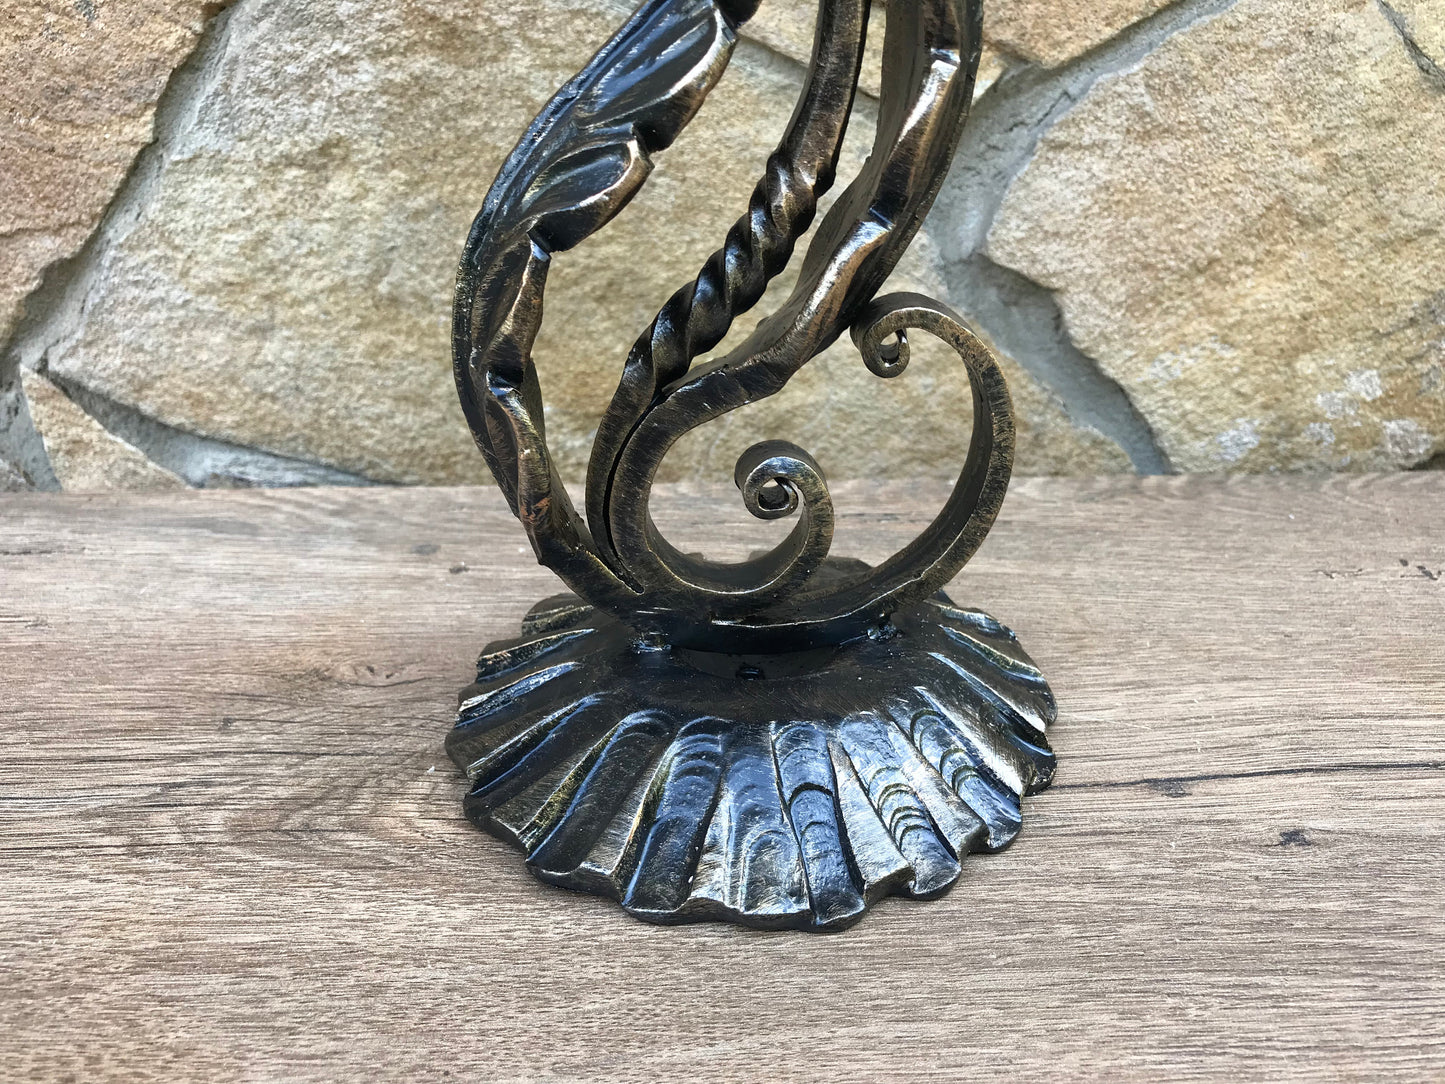 Metal candle holder,11 year anniversary,iron gift for her,steel anniversary gift for her,candlestick holder,wedding anniversary gift for her